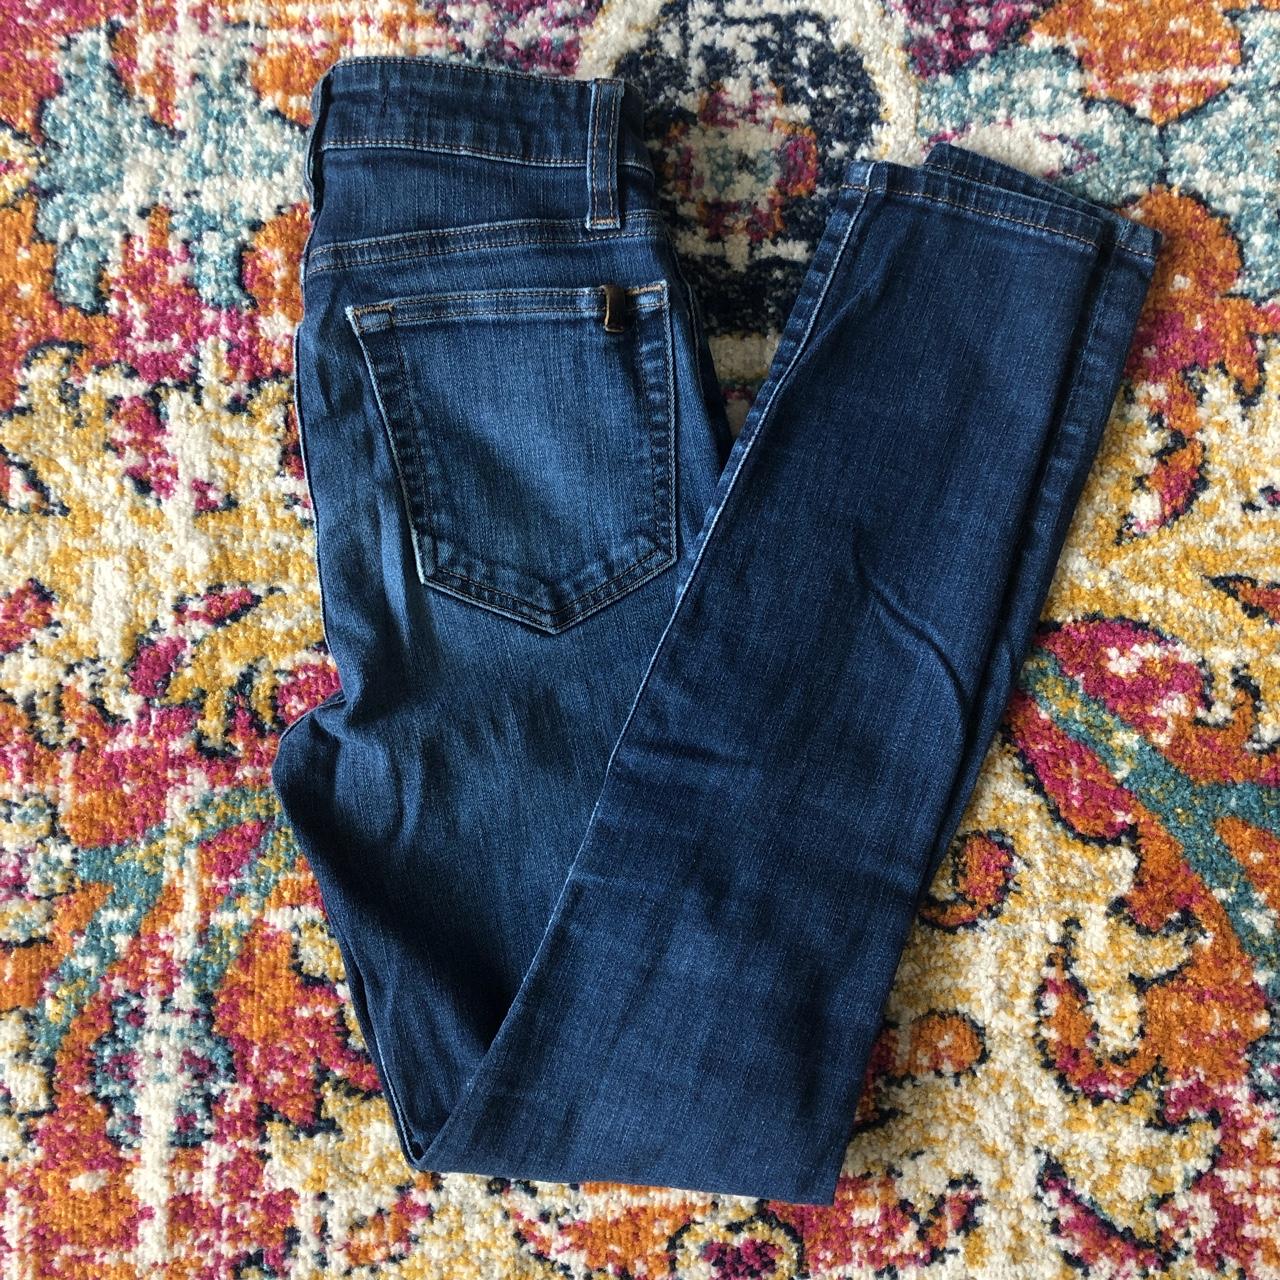 Joe's Jeans High Rise Skinny Ankle Size 24 They're... - Depop